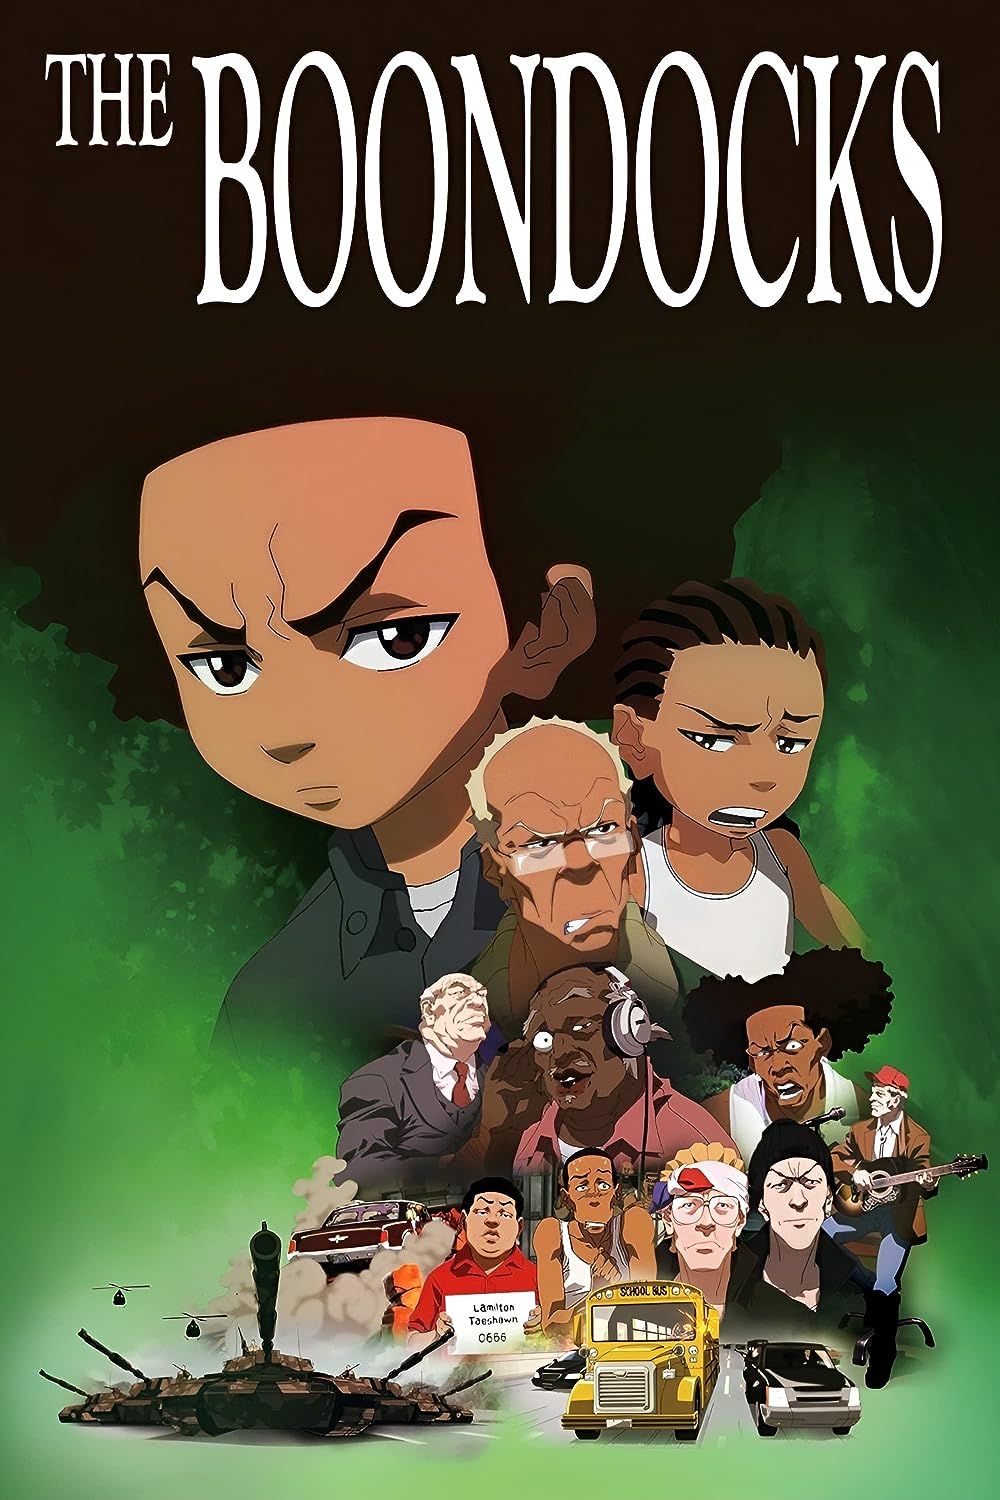 The Boondocks: The Complete Uncensored Series (DVD, 2014, 11-Disc Set) for  sale online